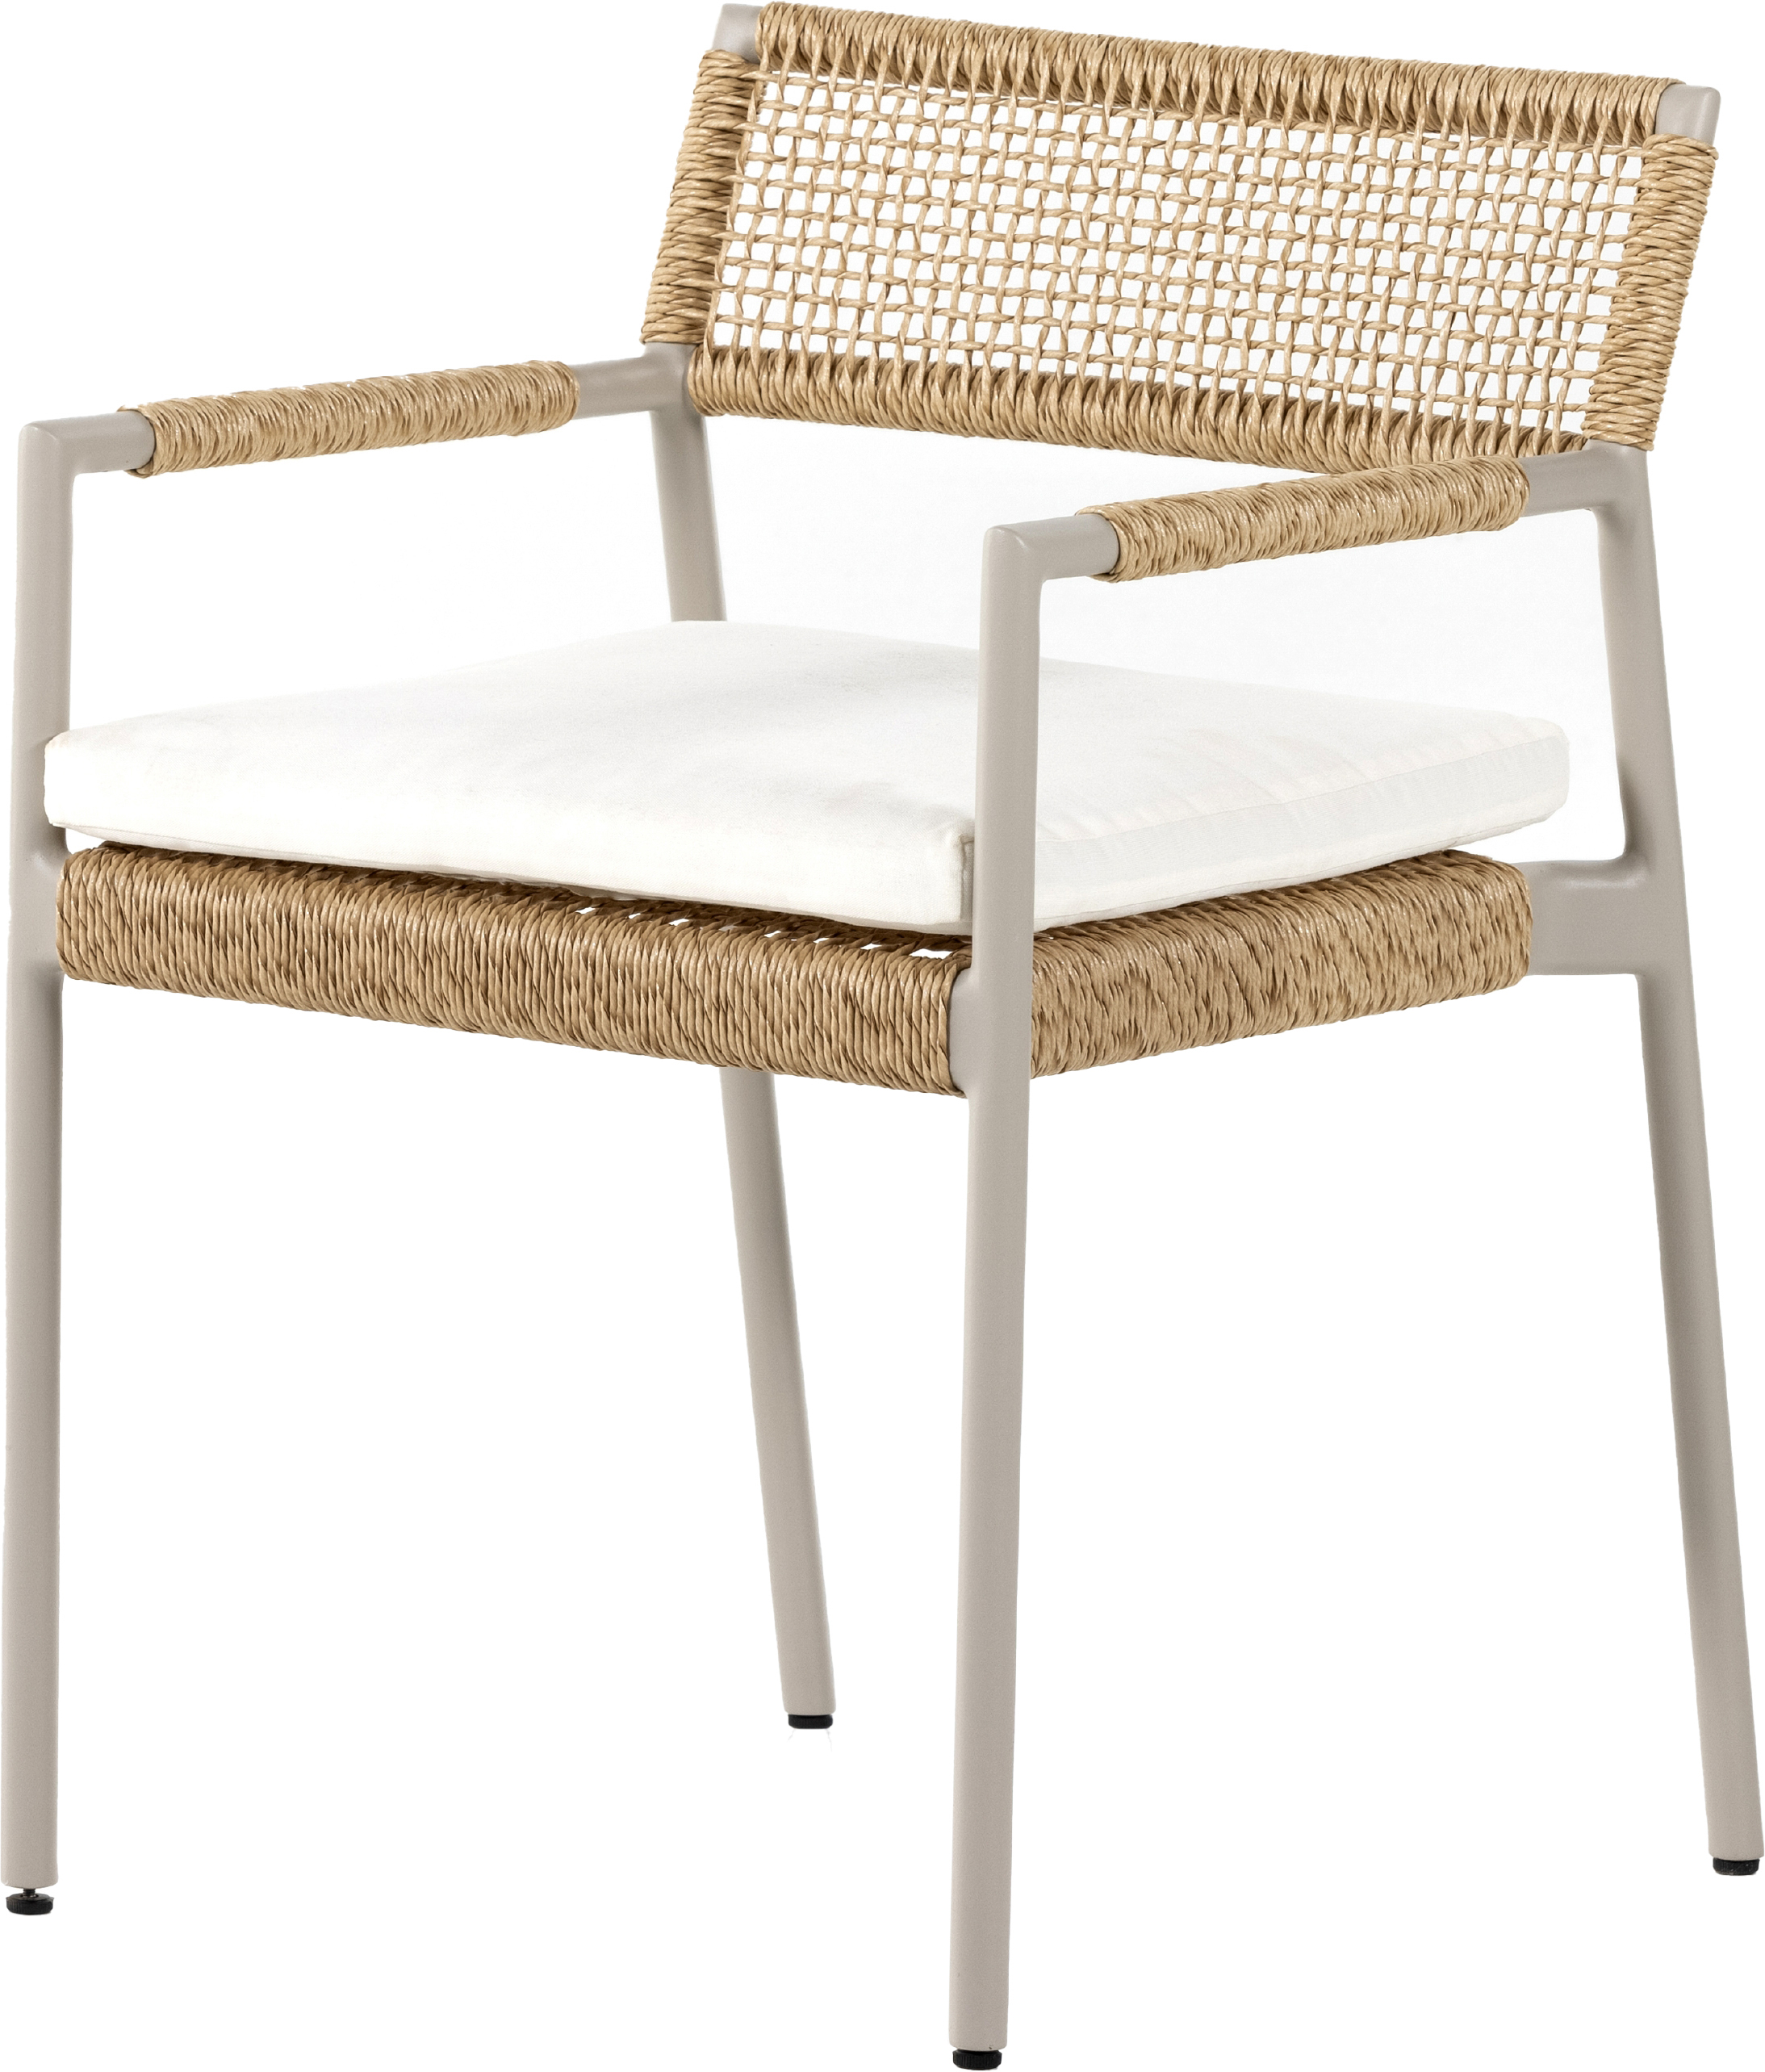 Keiko Outdoor Dining Armchair, Natural/White~P111118139